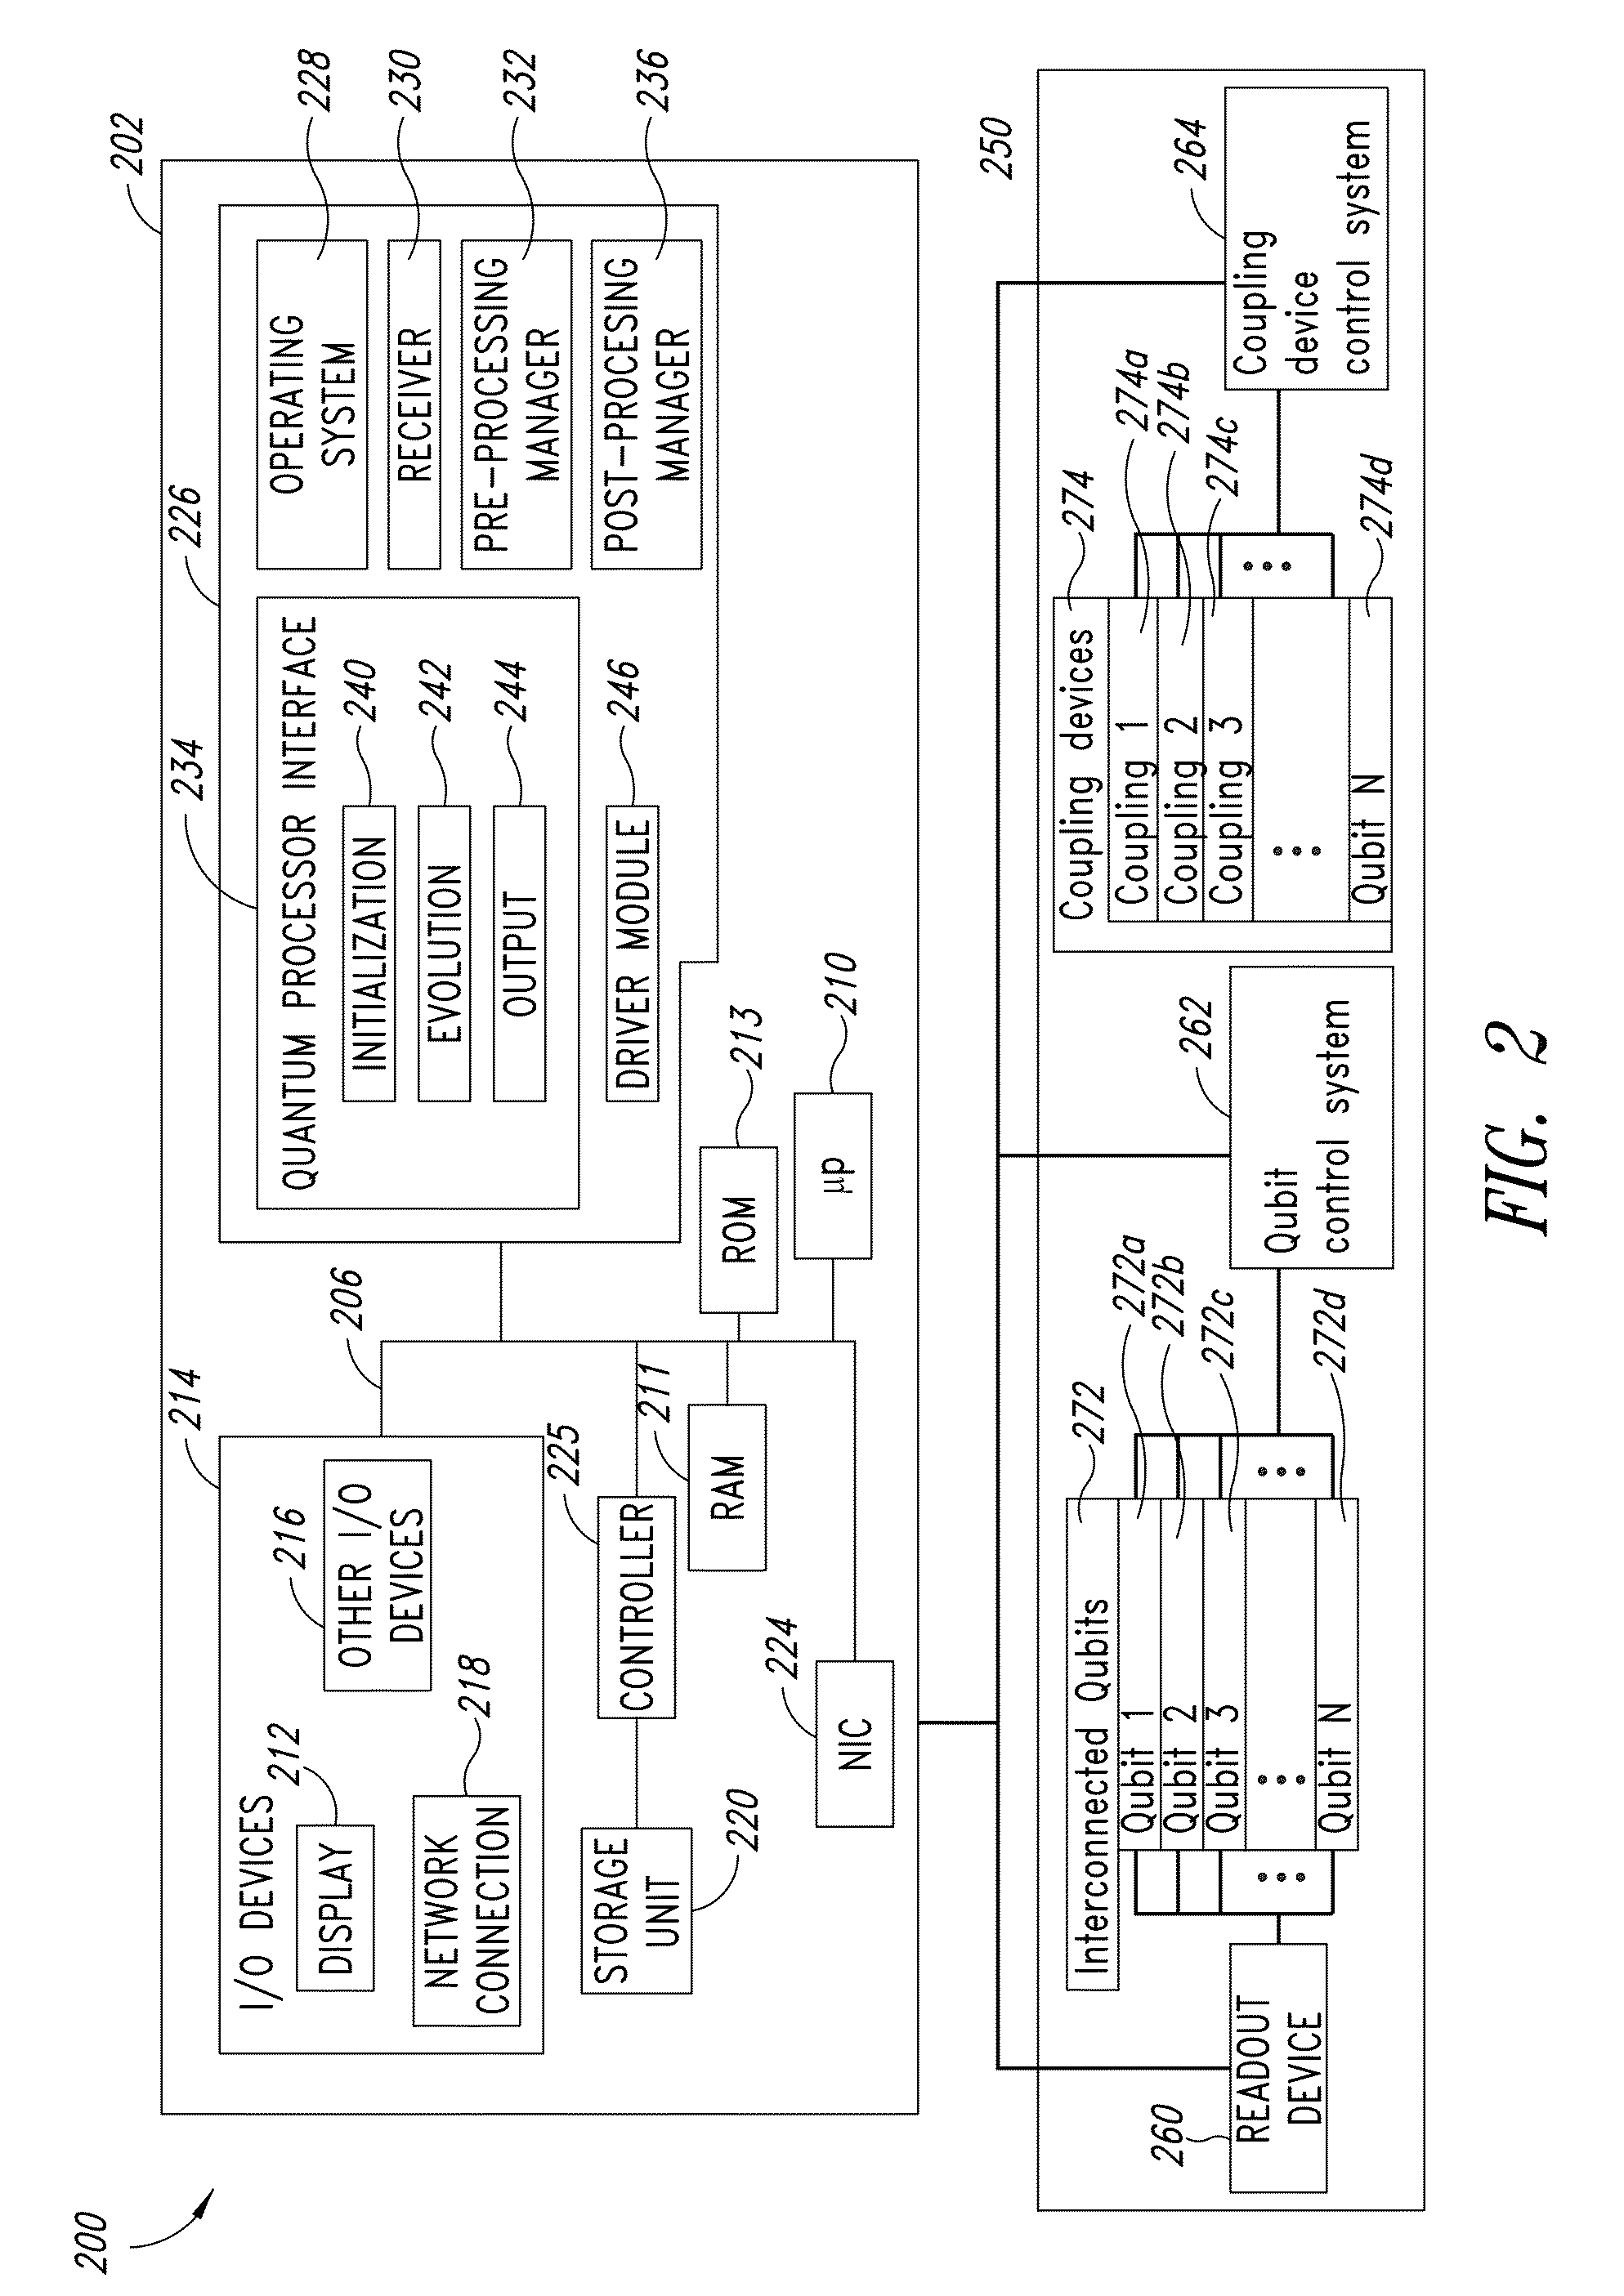 Systems and methods for improving the performance of a quantum processor by reducing errors